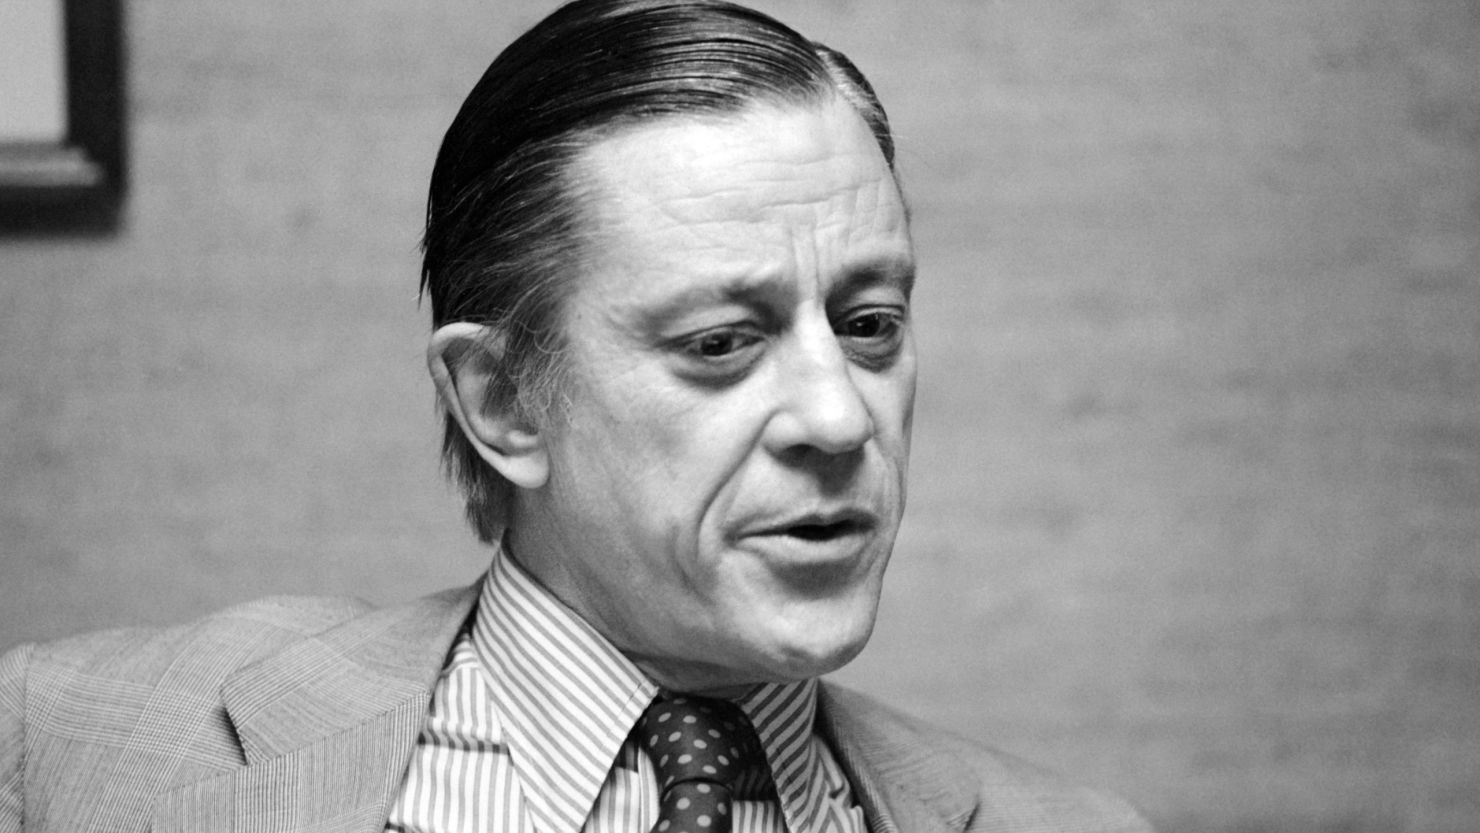 Former Washington Post editor Ben Bradlee, pictured in 1973, oversaw reporting on the Watergate scandal.